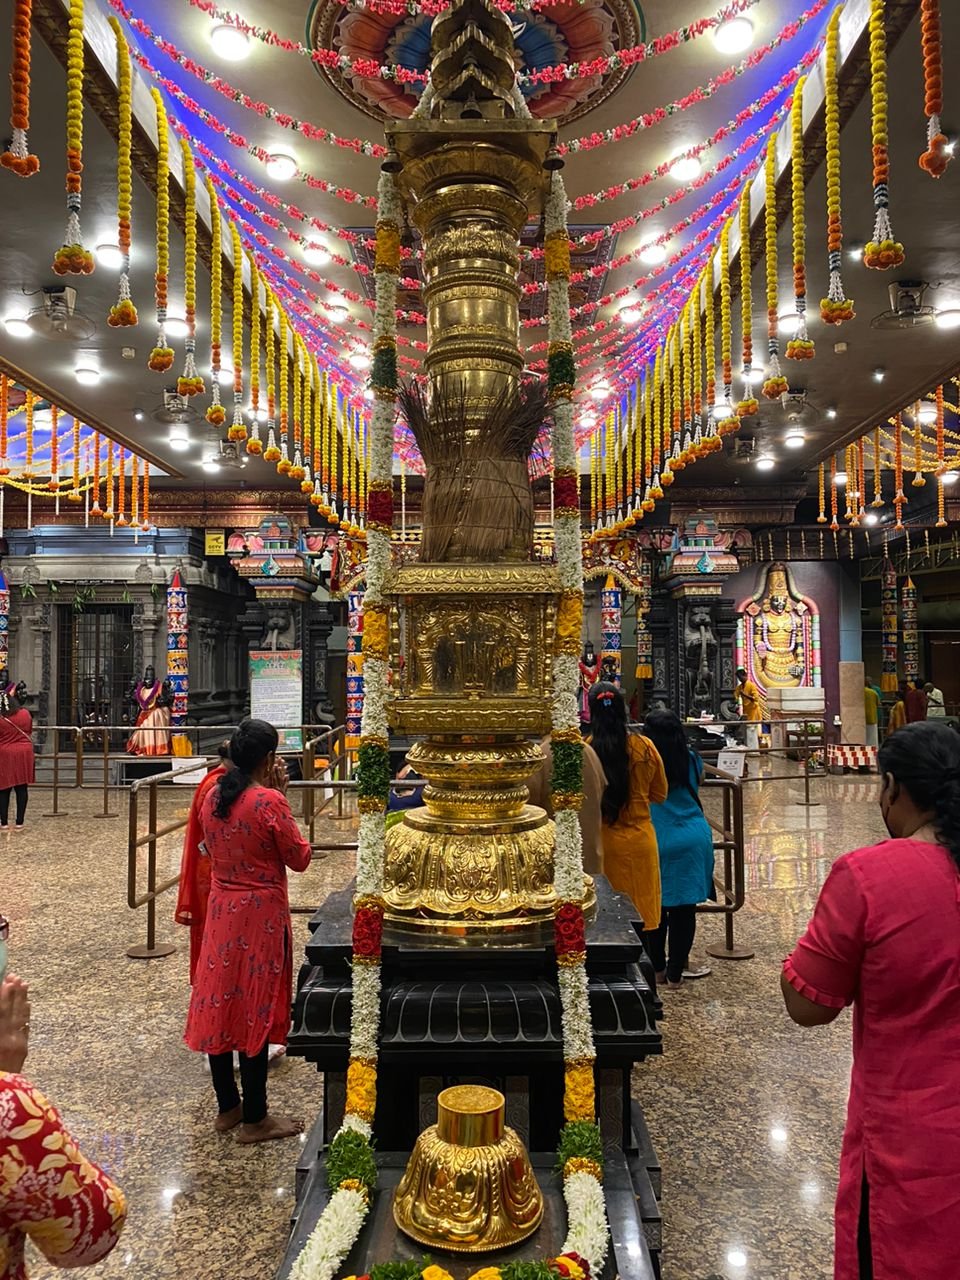 Indian temples in Malaysia - temple interior